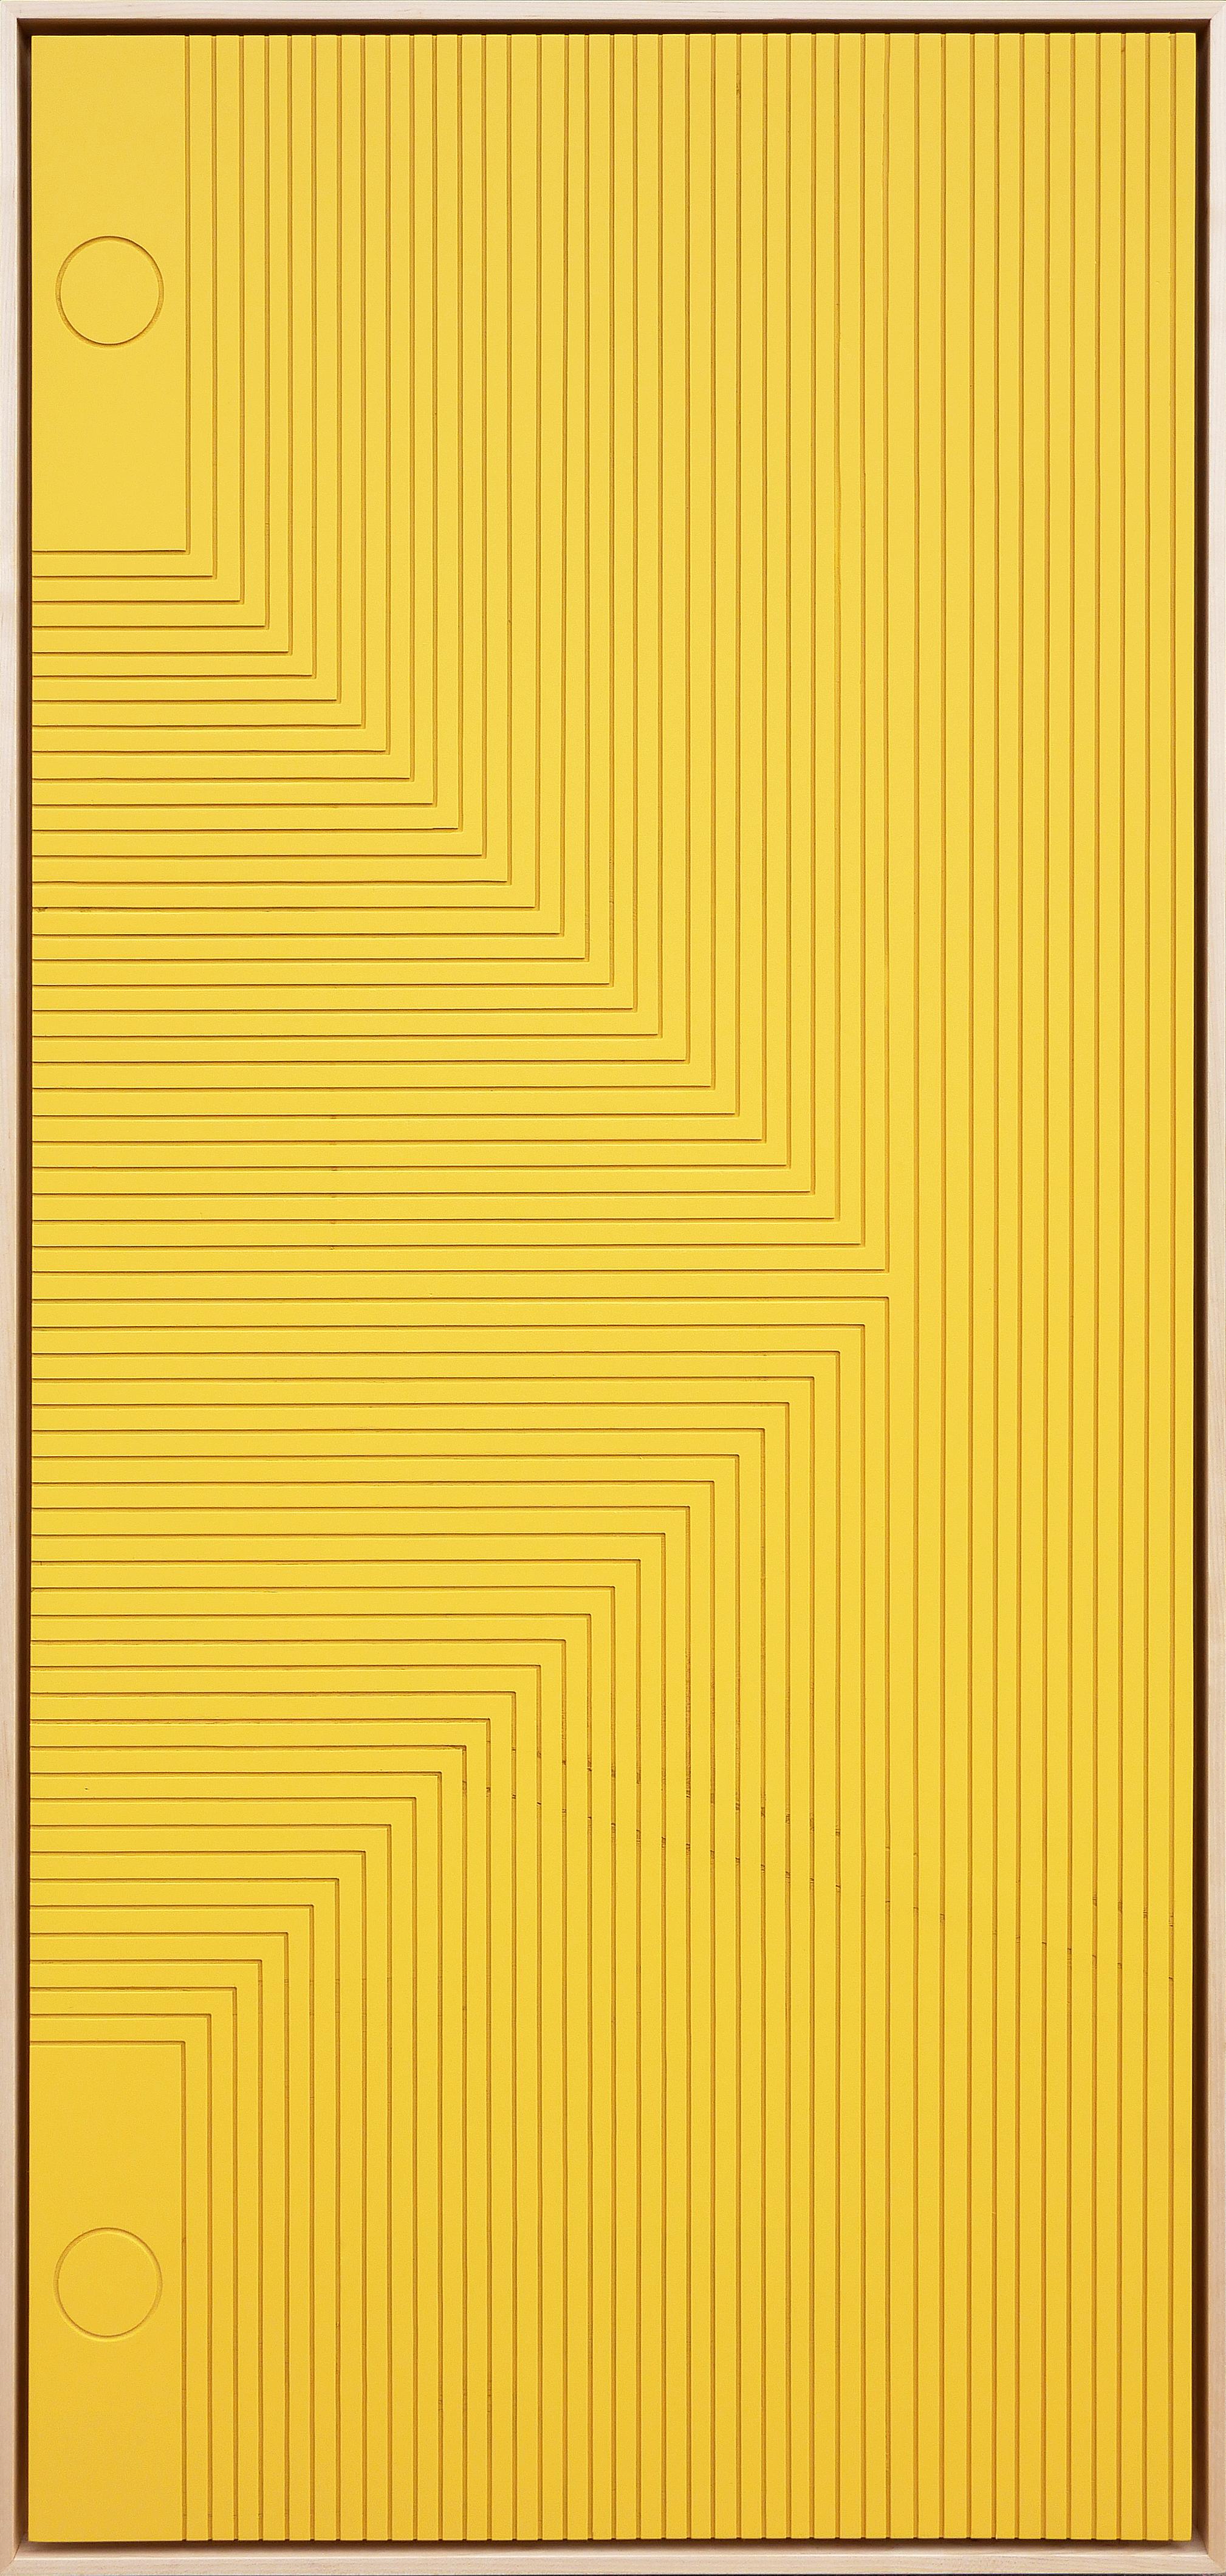 Matthew Reeves Abstract Sculpture - "Love Note" Contemporary Yellow Linear Abstract Geometric Groove Painting 